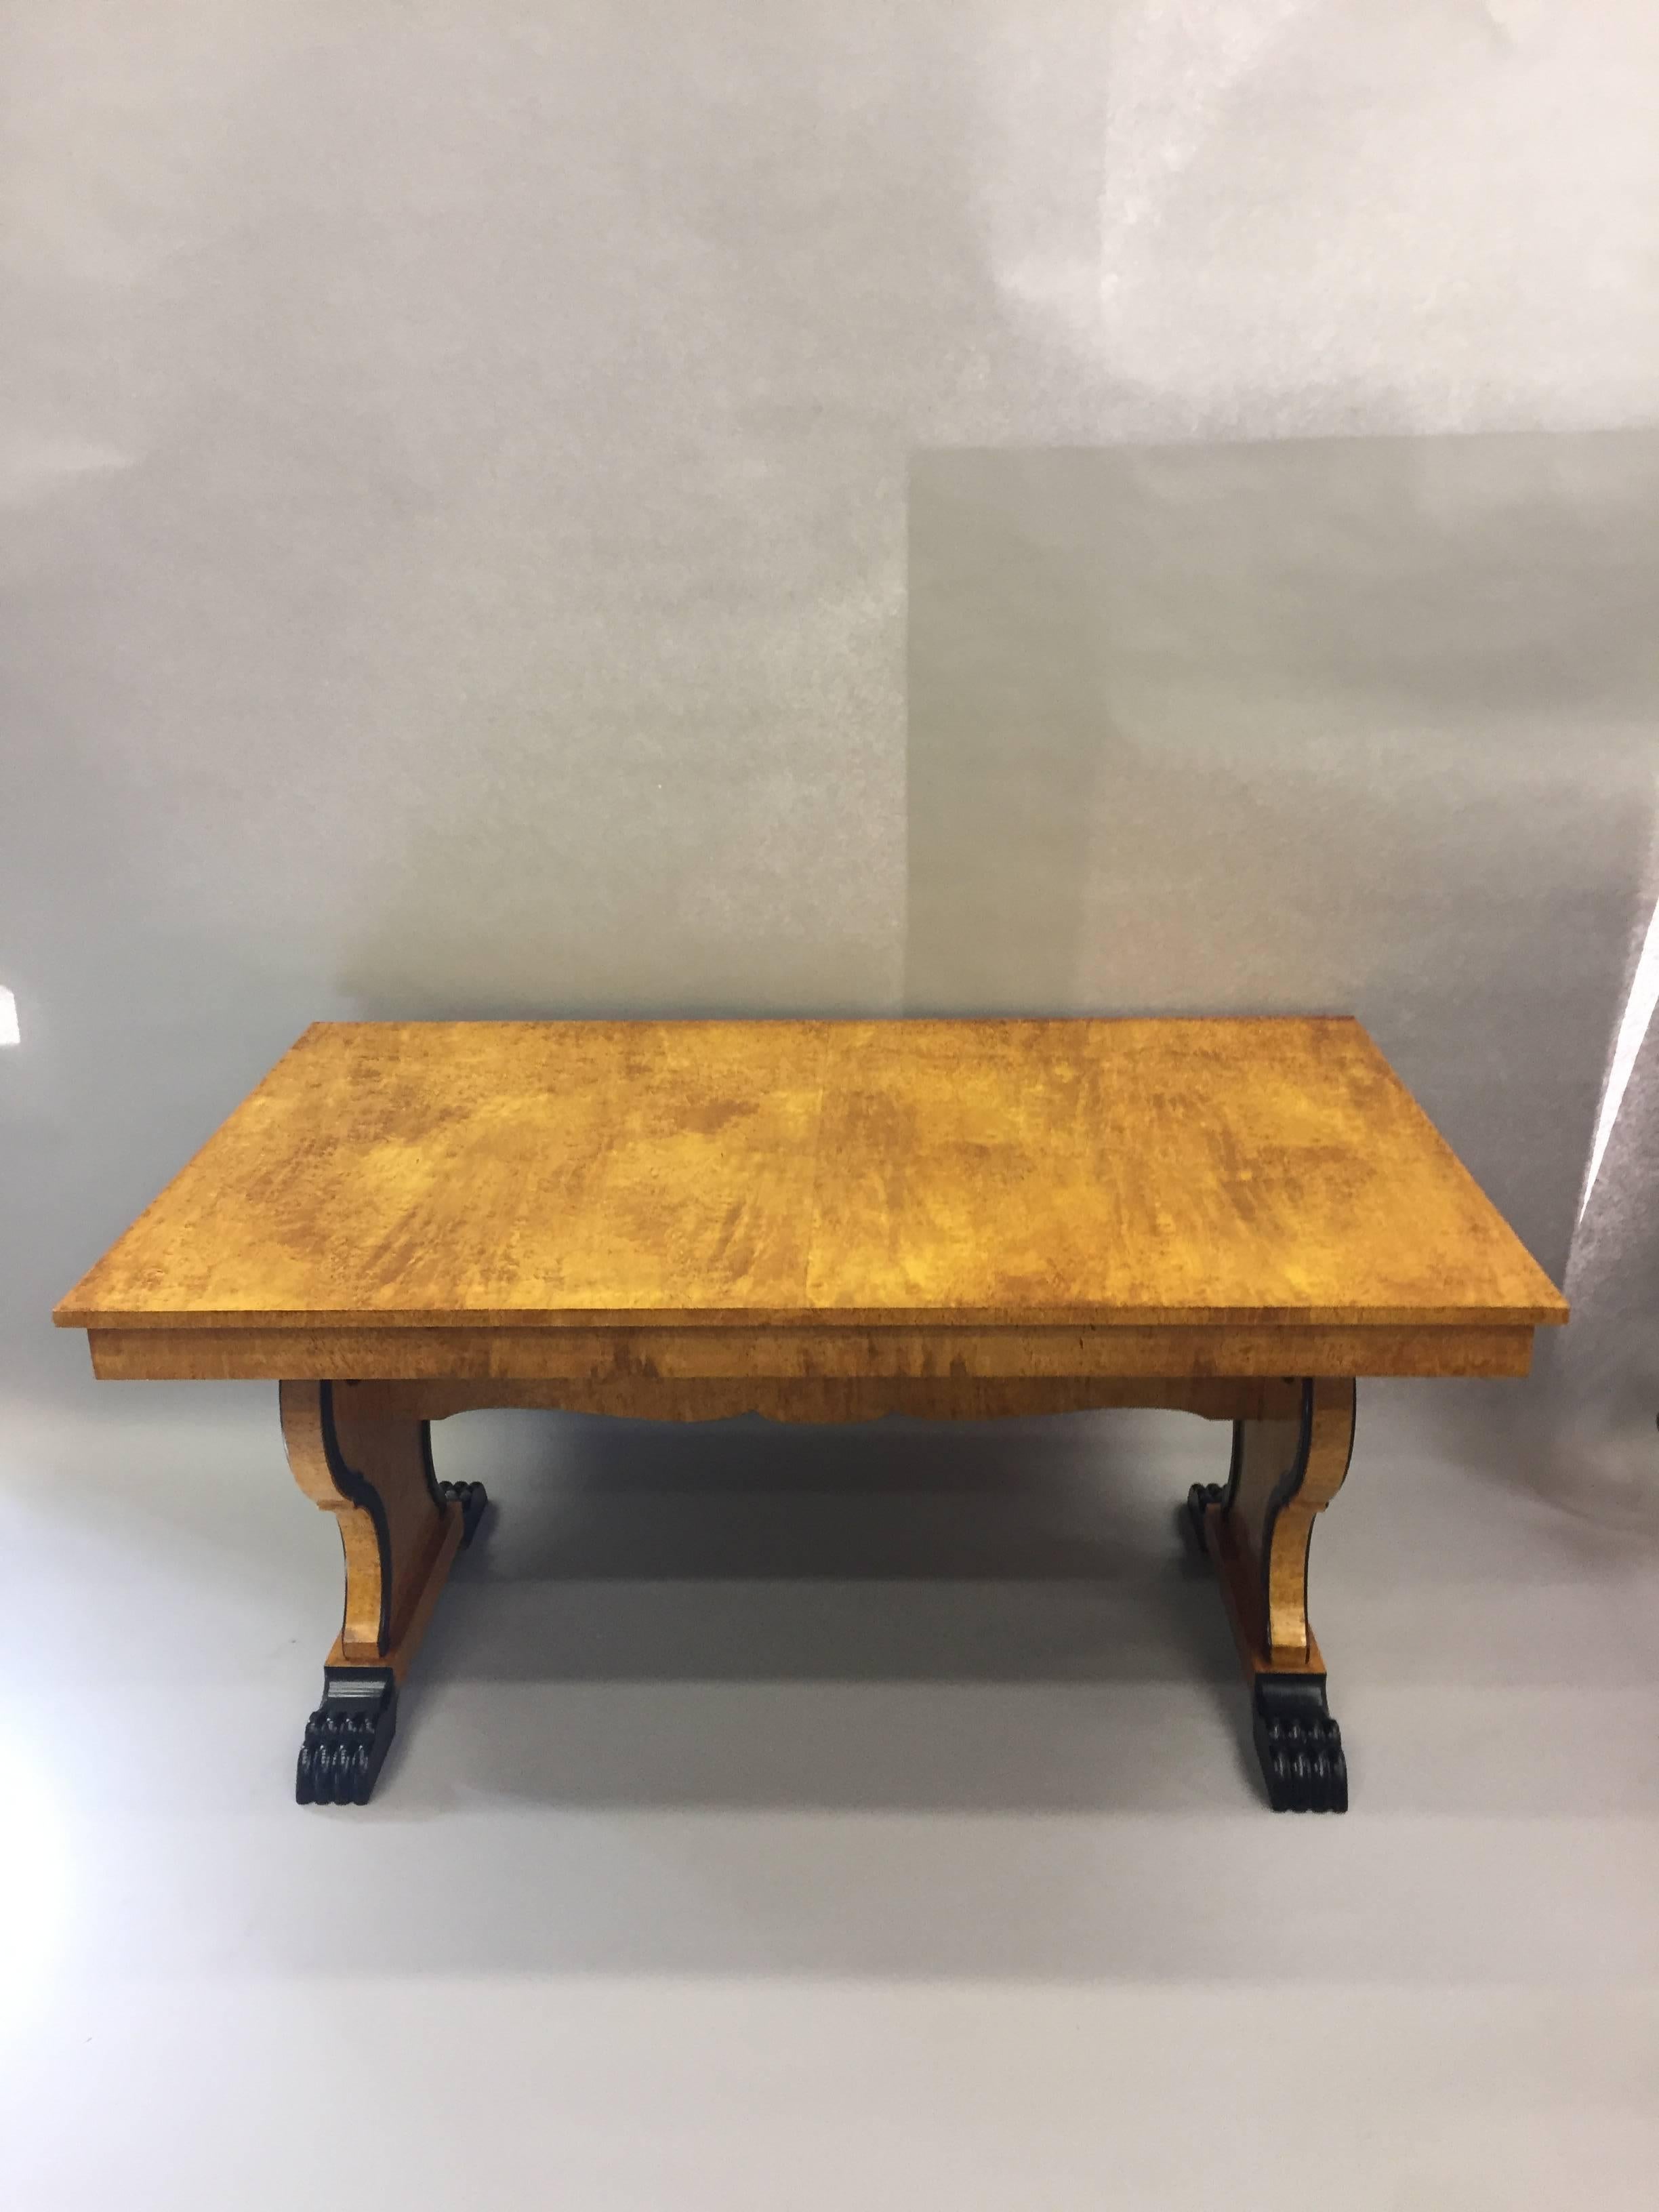 Magnificent Biedermeier dining table having ebonized carvings and banding that add a stunning contrast to the blonde polished bird's-eye maple veneer. Base appears to be ash. Opens with two extension leaves to an impressive 107.25 L.
Measures: Each